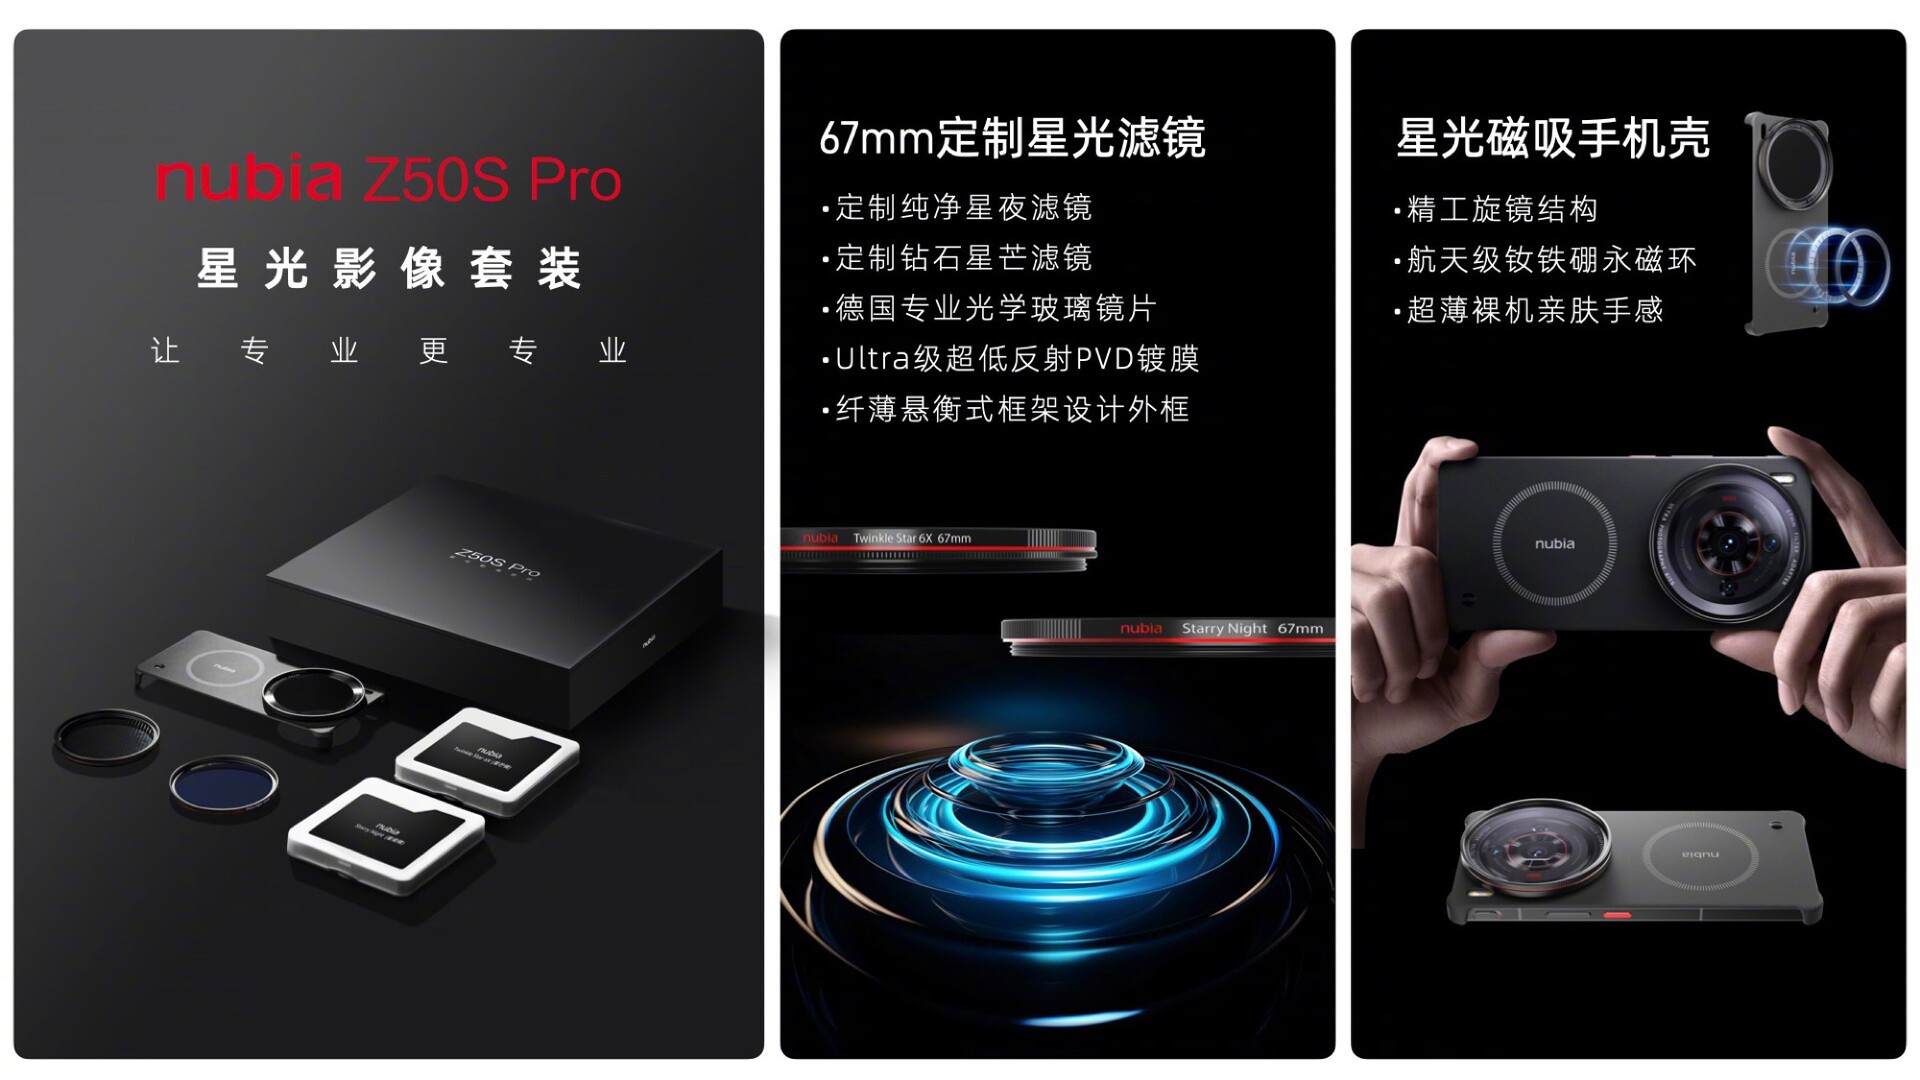 Nubia Z50S Pro Starlight Imaging Kit now available in China for 599 Yuan  ($82) - Gizmochina